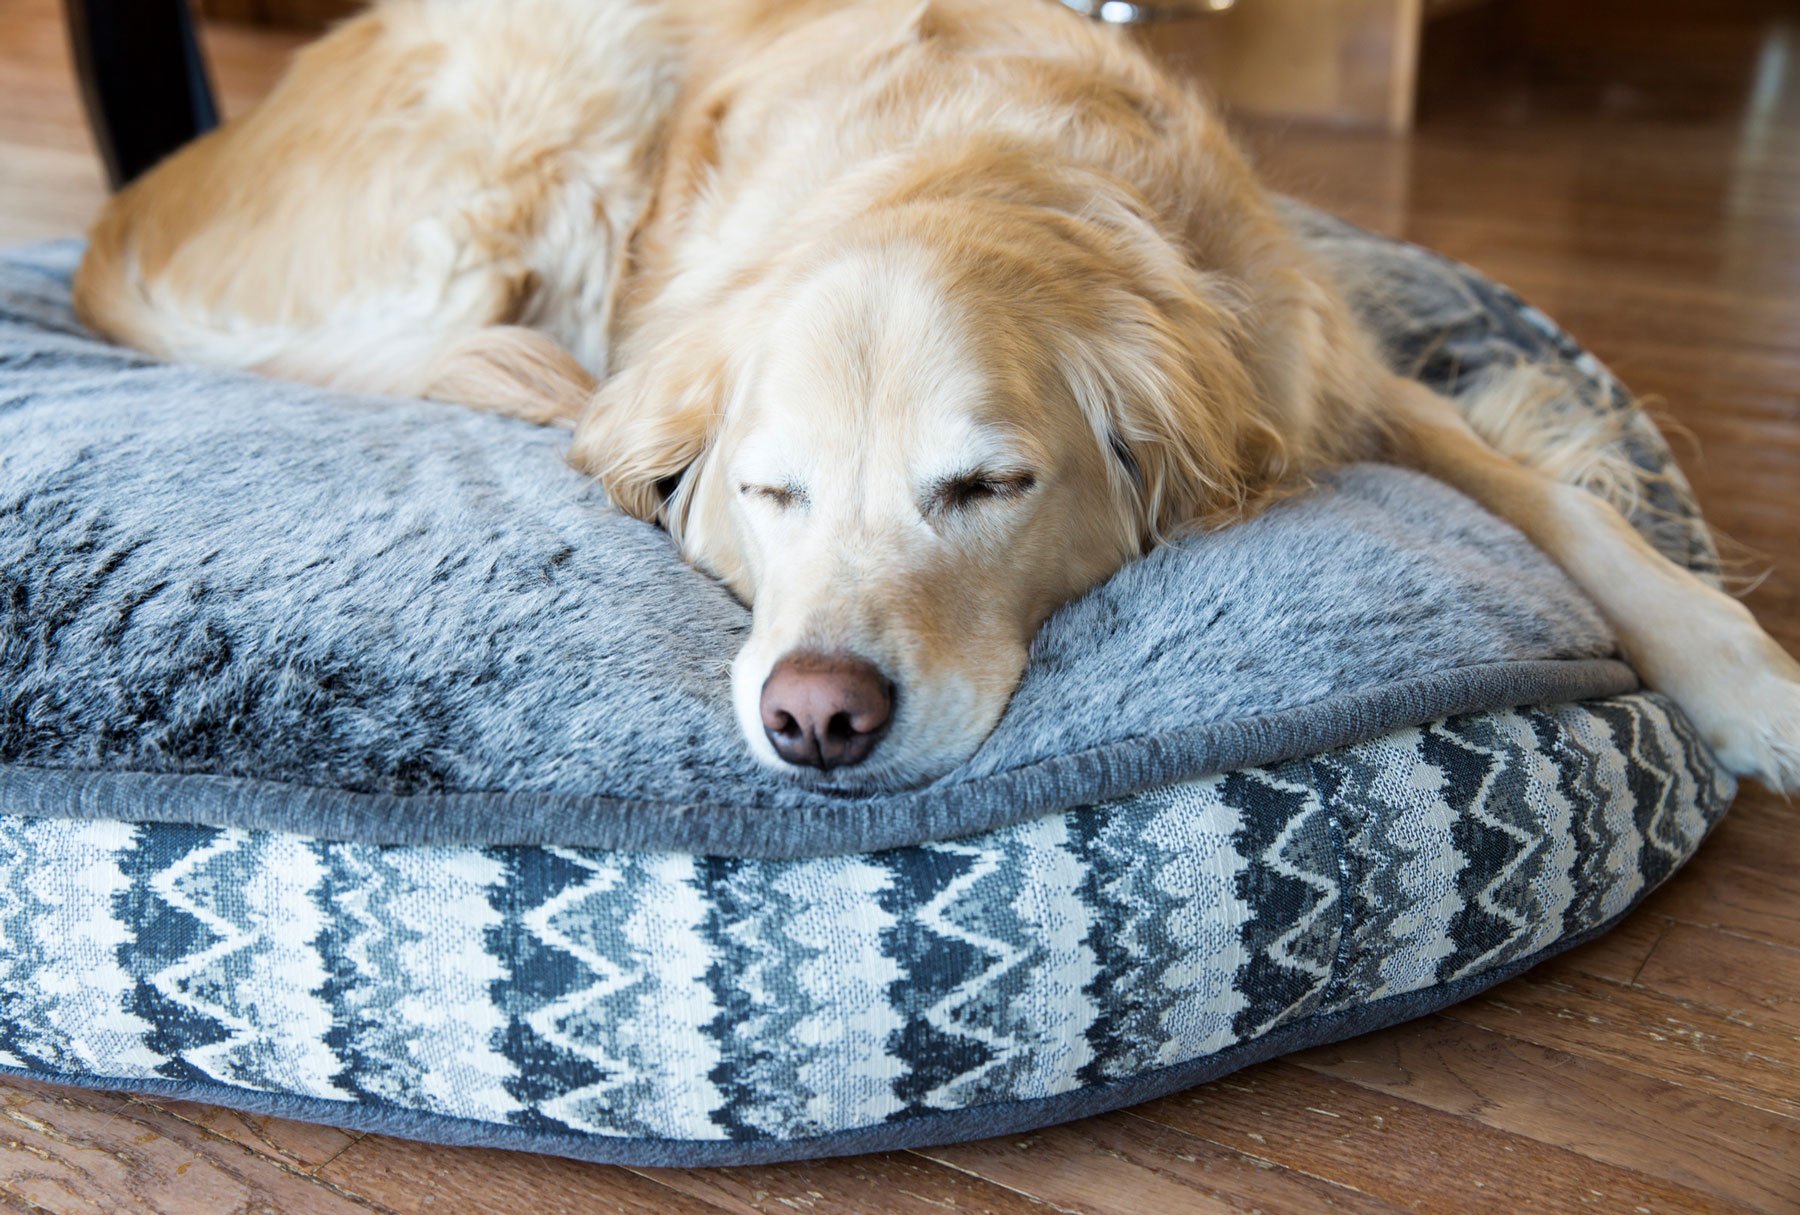 elevated beds help dogs with arthritis